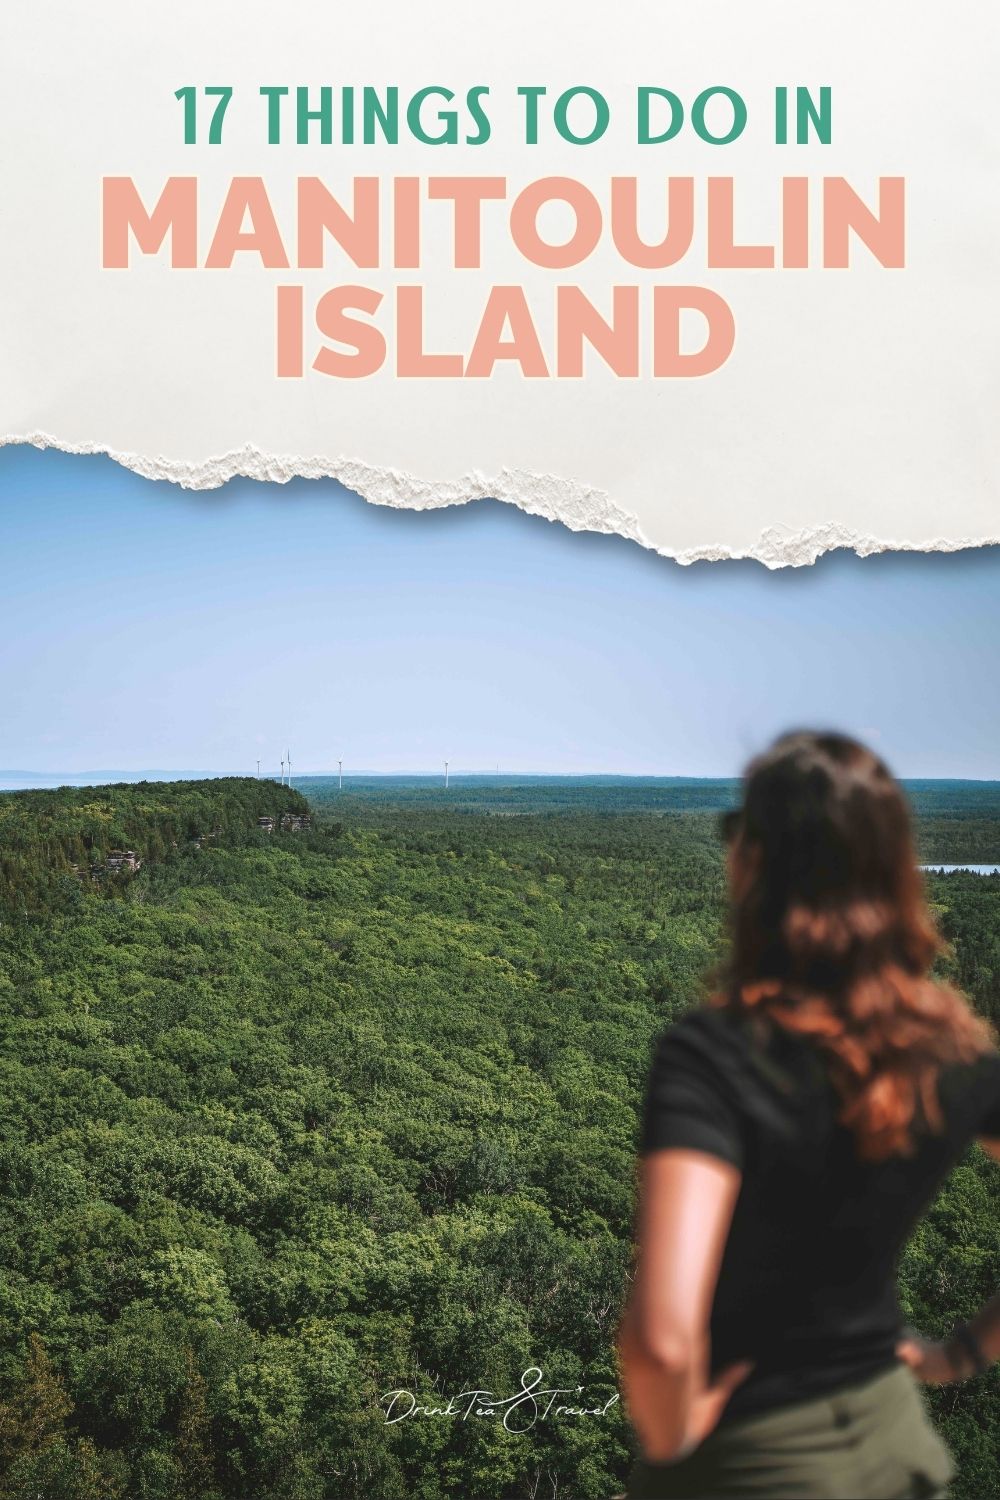 Things to do in Manitoulin, Island